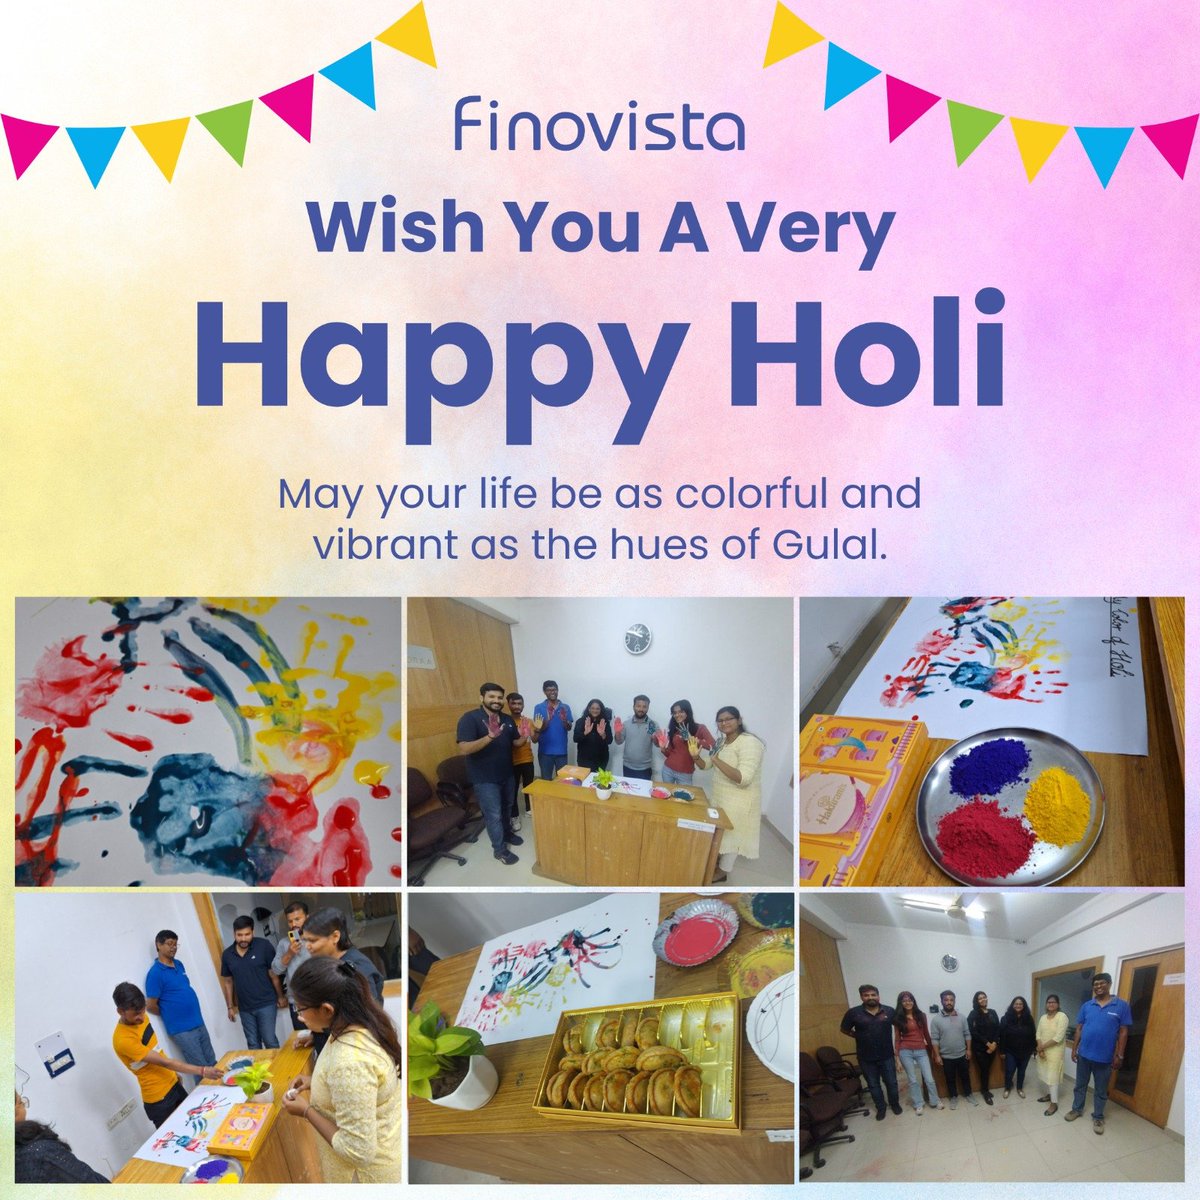 @Finovista wishes you all a vibrant & eco-conscious Holi celebration! 🎇 Let's join hands to embrace sustainability & pave the way for a greener, more promising future. Here's to painting the world with the hues of renewable energy! ✨ #sustainability #happyholi #teamfinovista